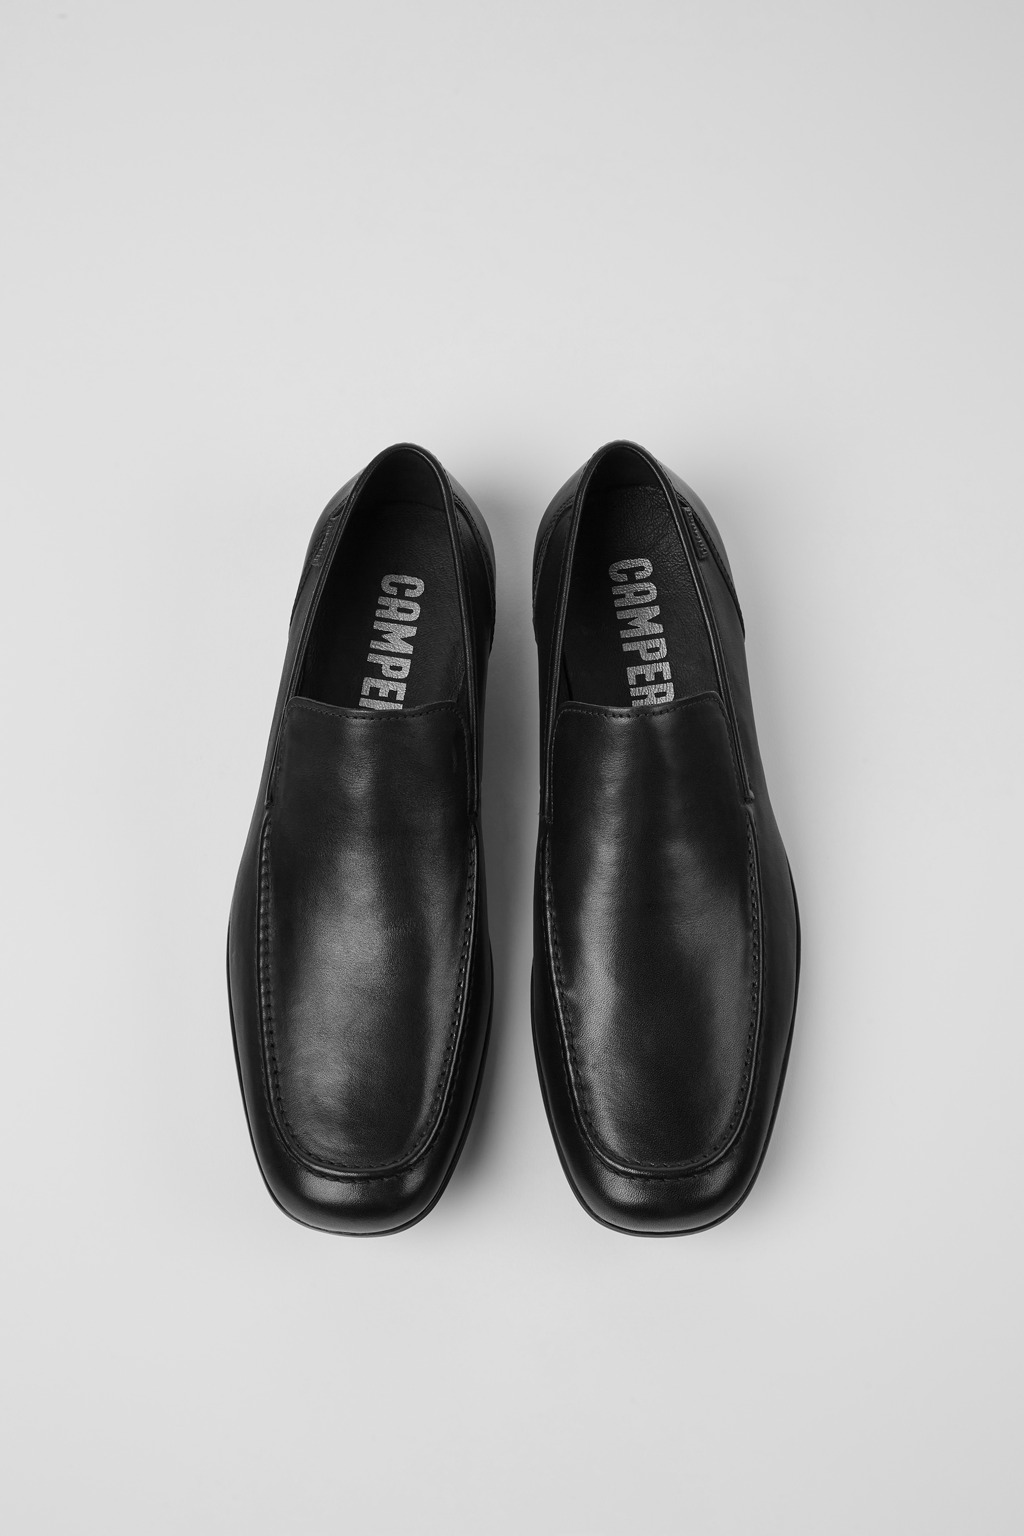 mauro Black Formal Shoes for Men - Fall/Winter collection - Camper 